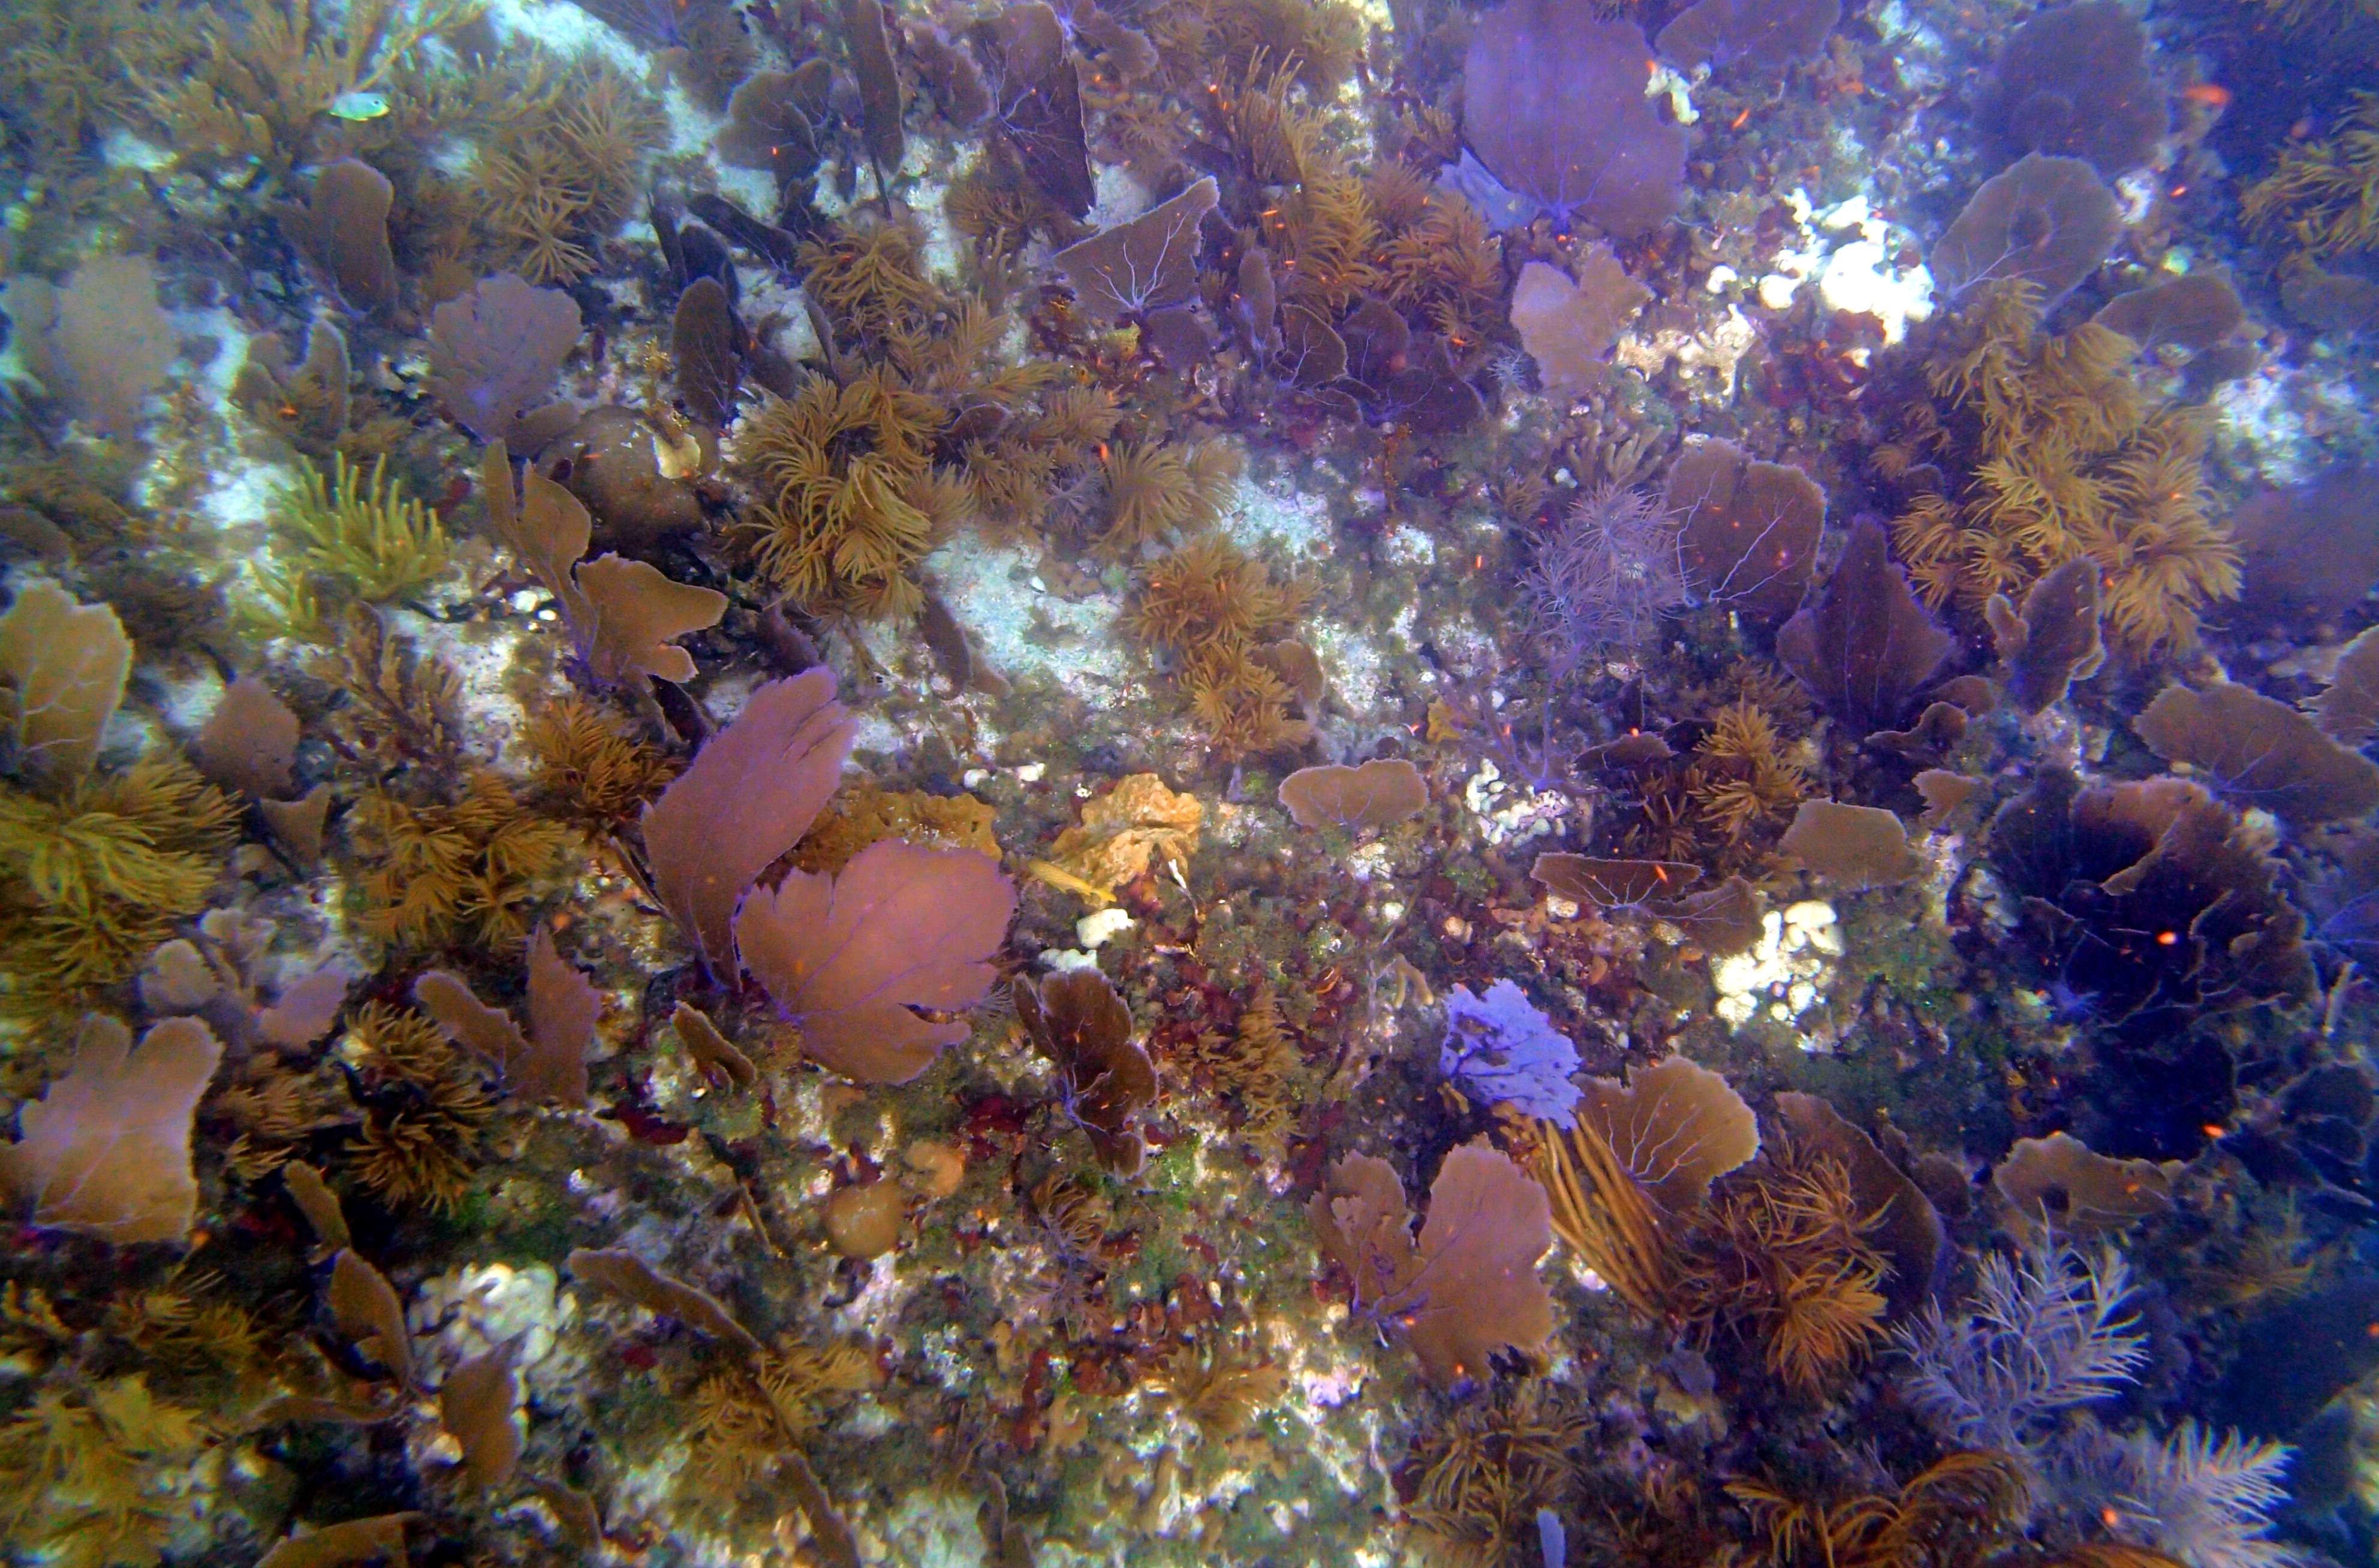 02-corals-about-10-feet-down-at-the-big-reef-jpg.967604